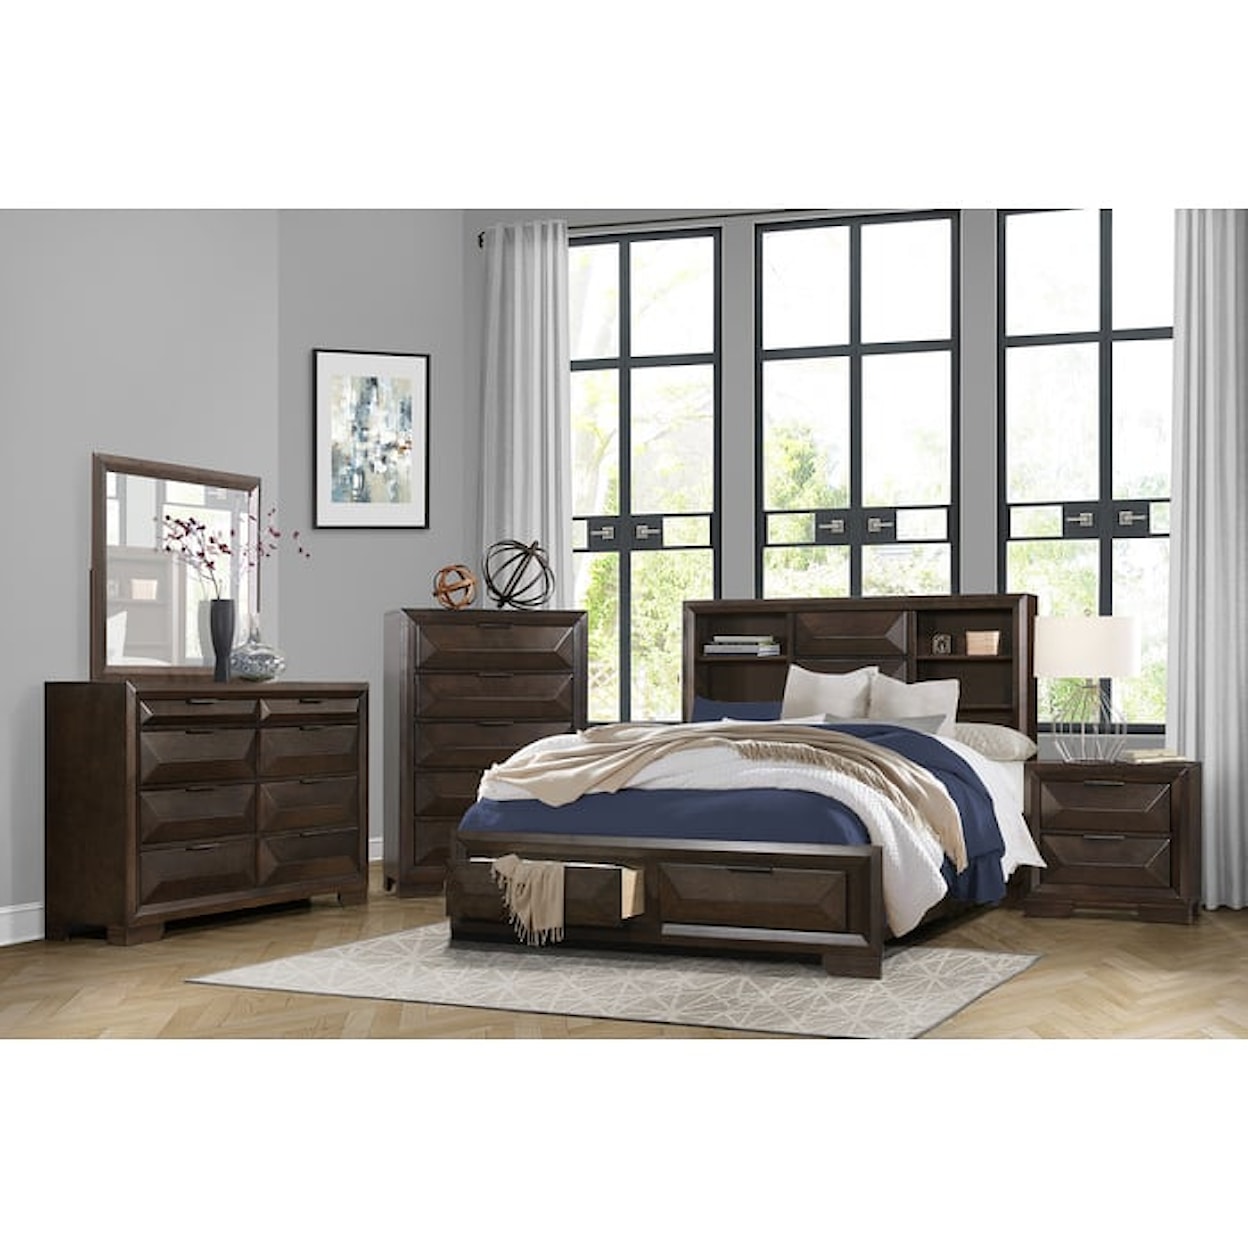 Homelegance Chesky Queen Platform Bed with Footboard Storage